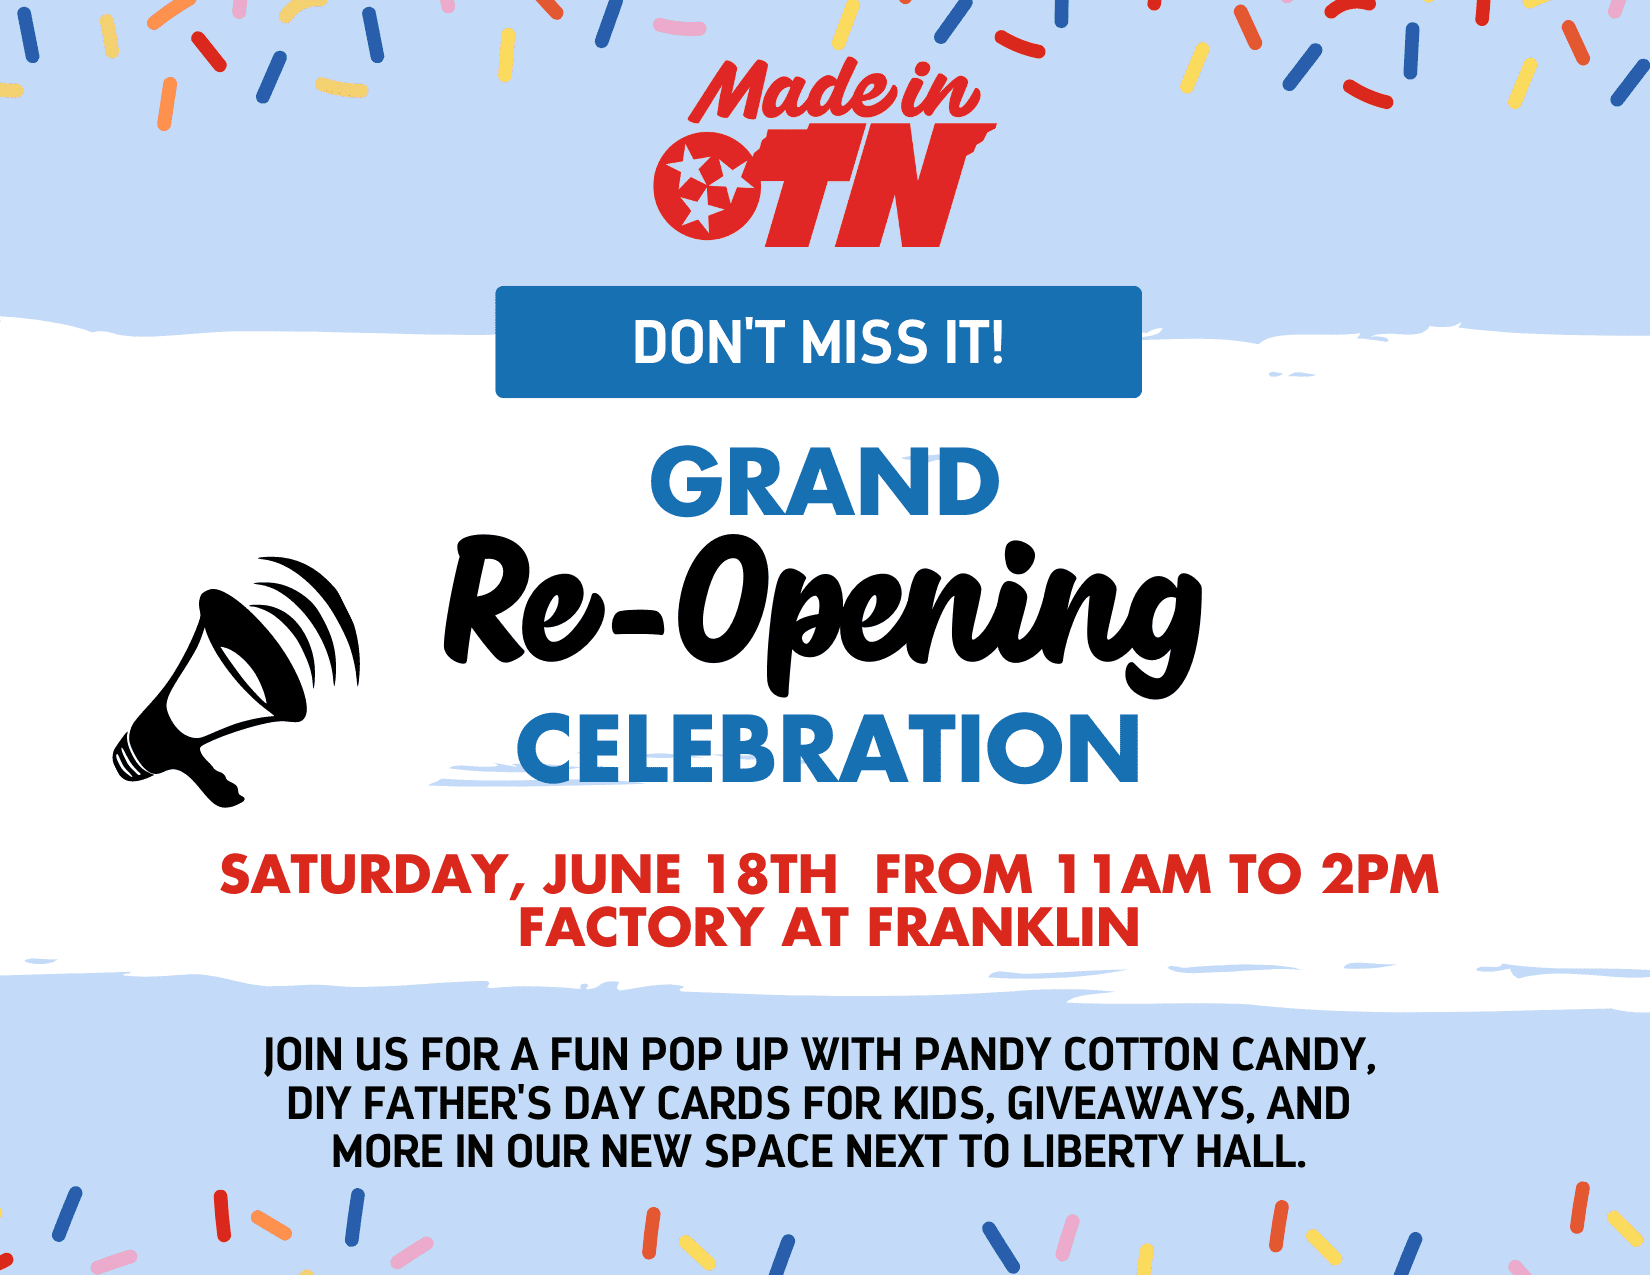 Made in TN Grand Re-Opening Celebration at Factory at Franklin in downtown Franklin, enjoy a fun pop up with Pandy Cotton Candy, The Nashville Mom will be signing copies of her new children's book, a table with cards for kids to color for Father's Day will be set up and of course, we'll have balloons, giveaways, music, and more.